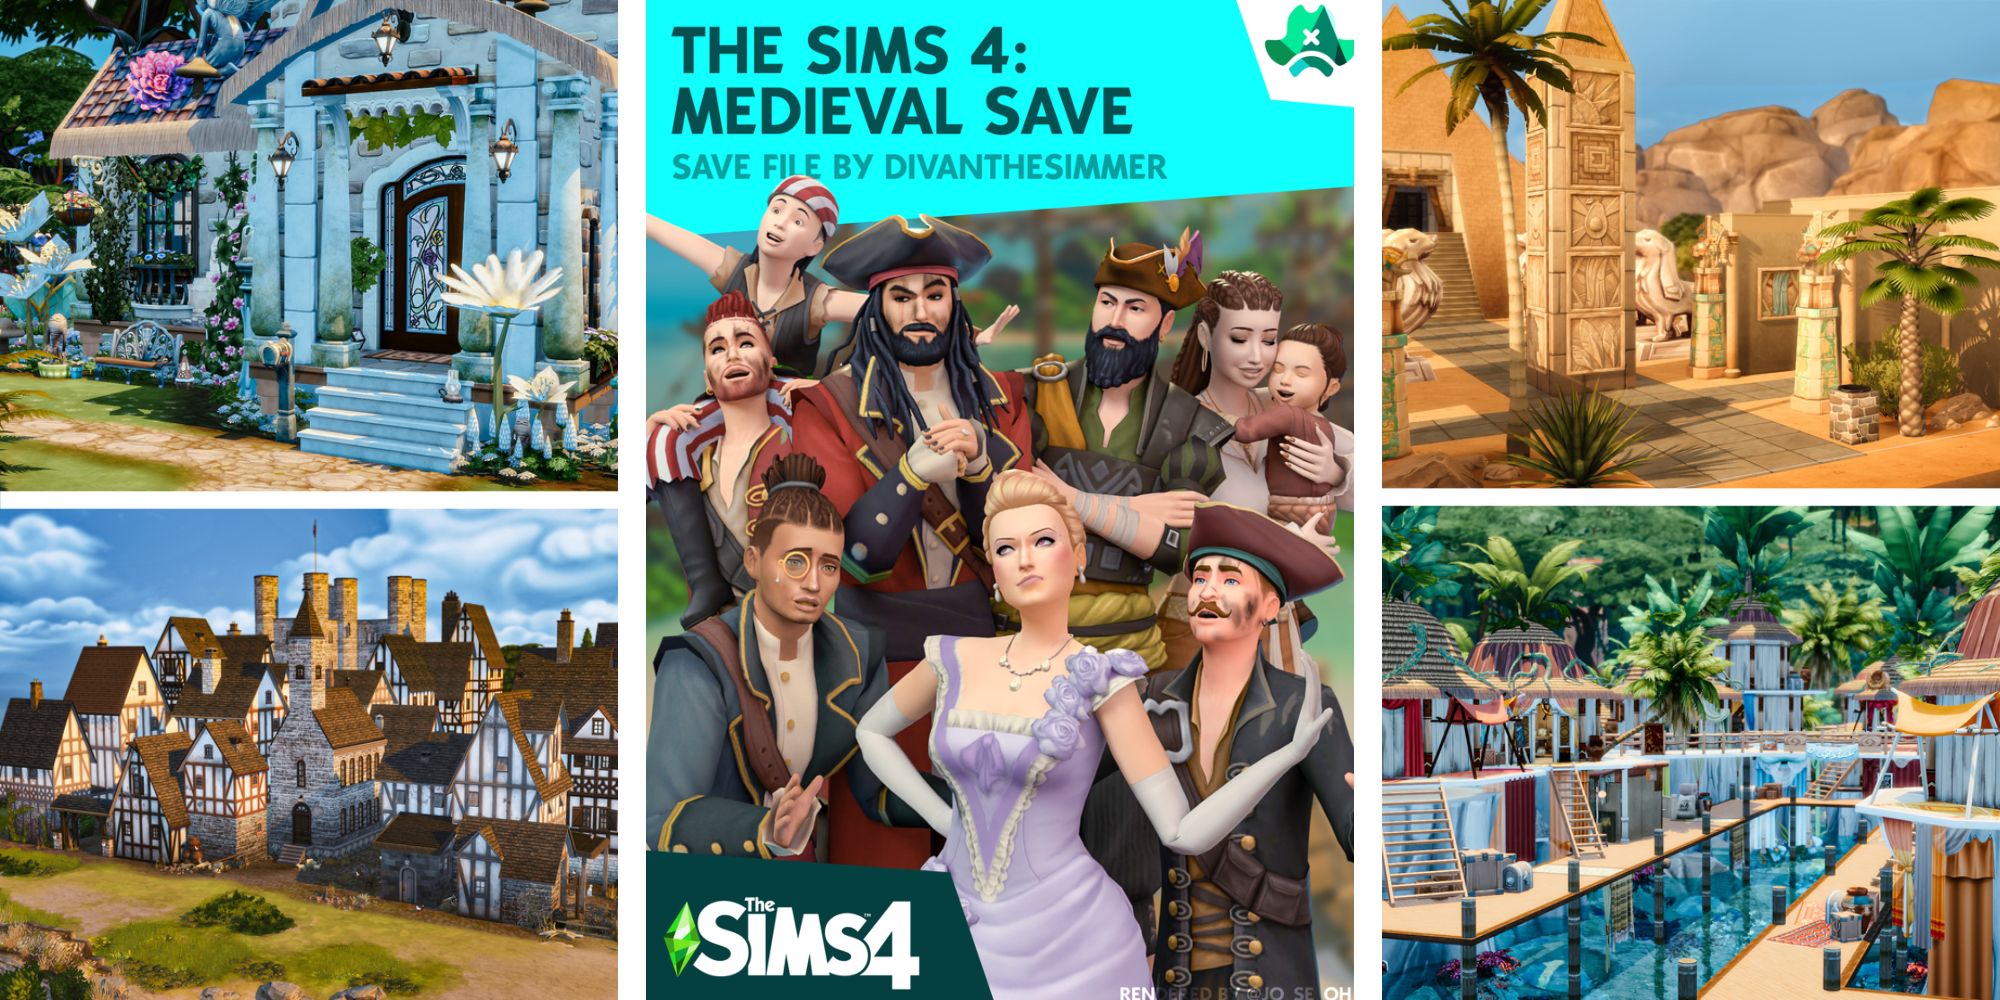 A collage of medieval locations in The Sims 4 from the Medieval Save by Divan The Simmer